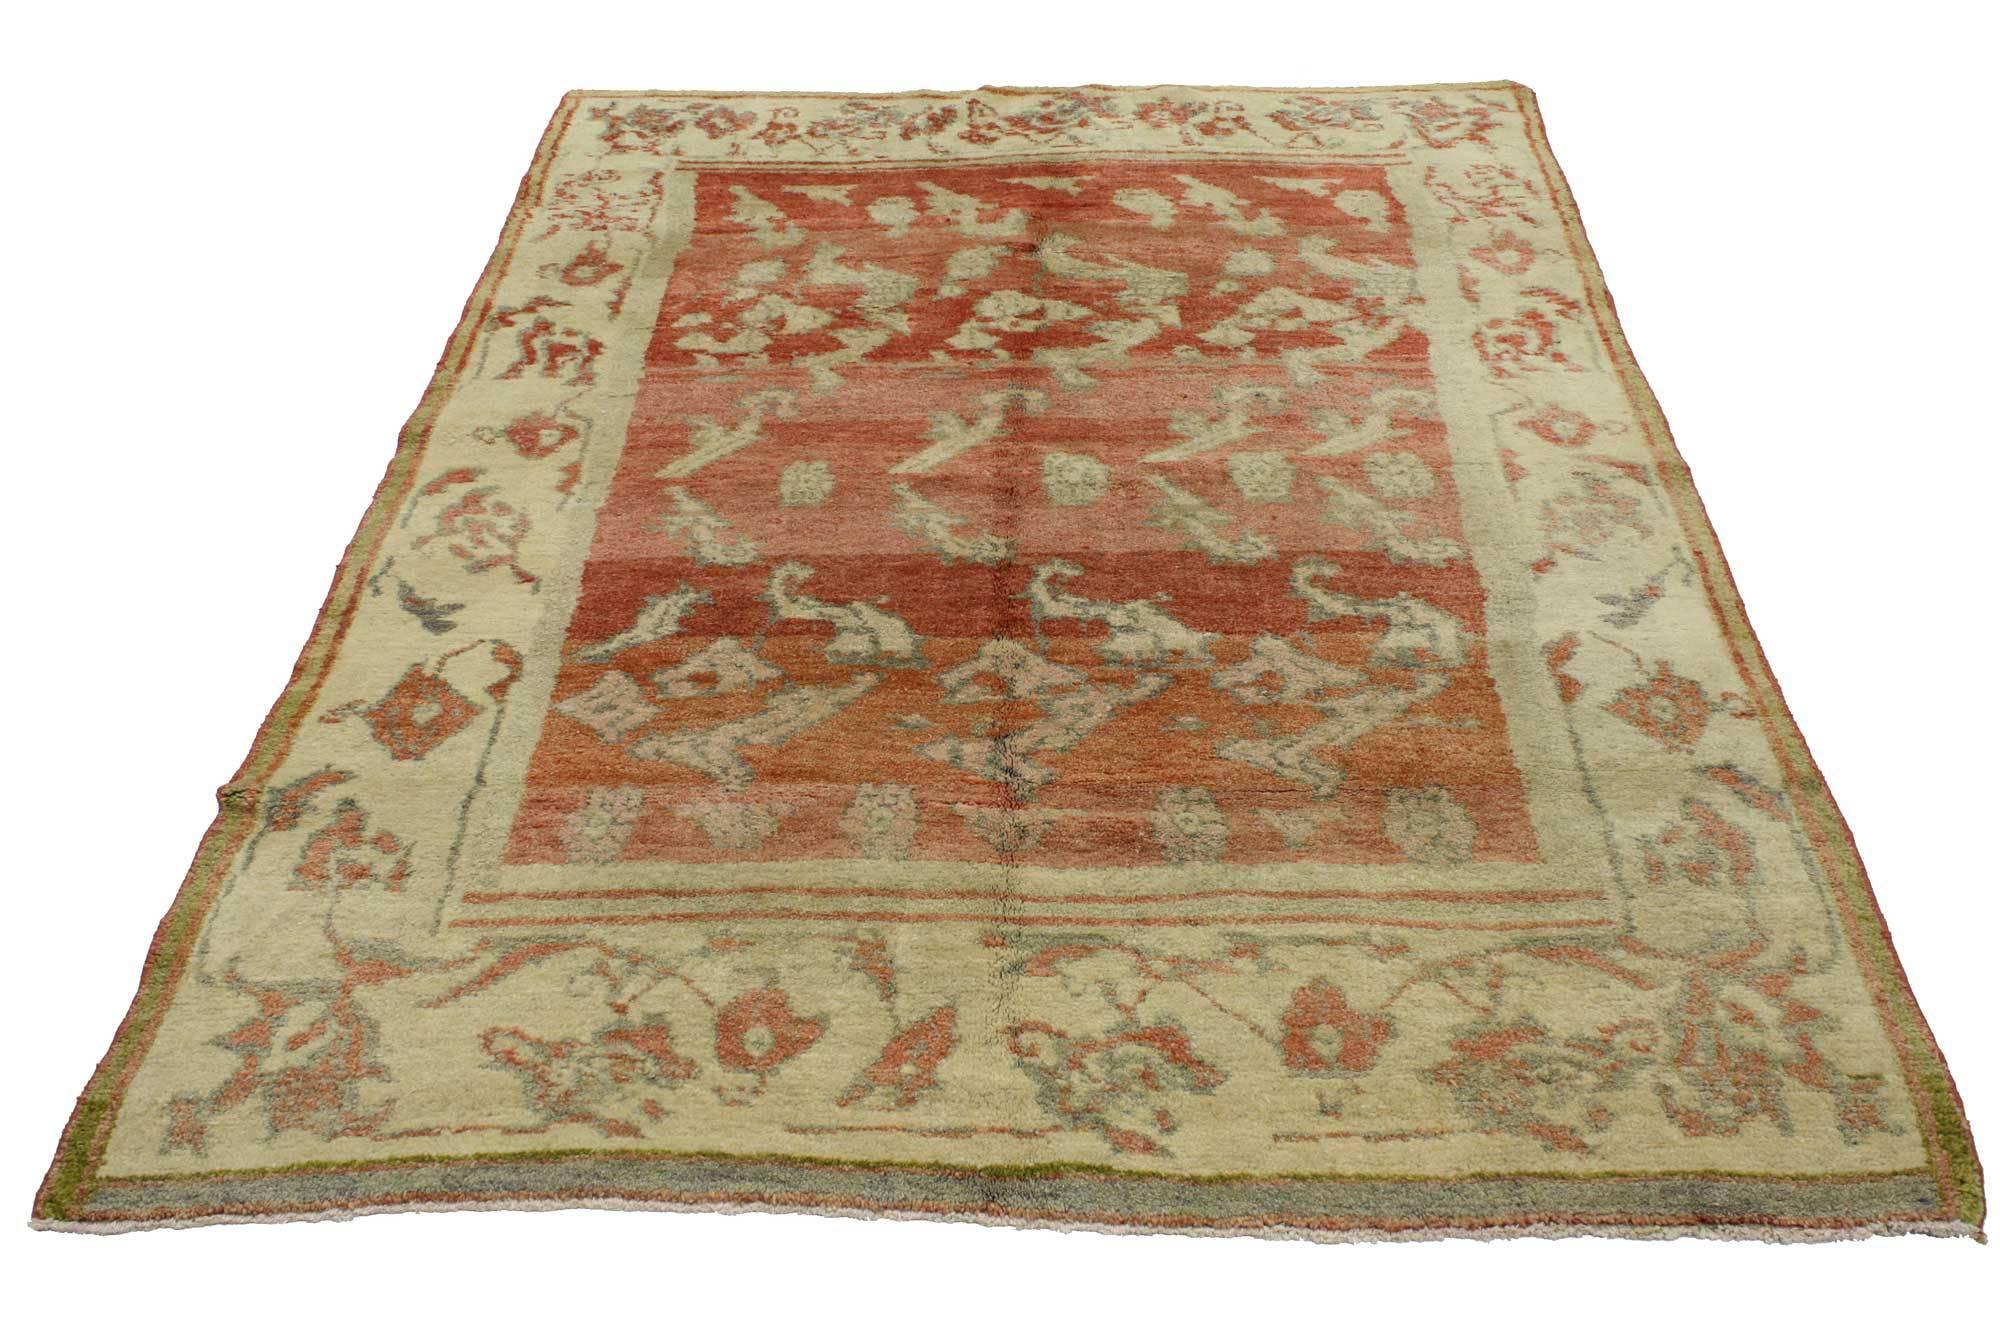 51705 Vintage Turkish Oushak rug with Rustic Prairie Style 04'07 x 06'11. This hand knotted wool vintage Turkish Oushak rug features an all-over pattern of organic shapes composed of leafy tendrils, flowers, and curled sickle leaves. It is enclosed